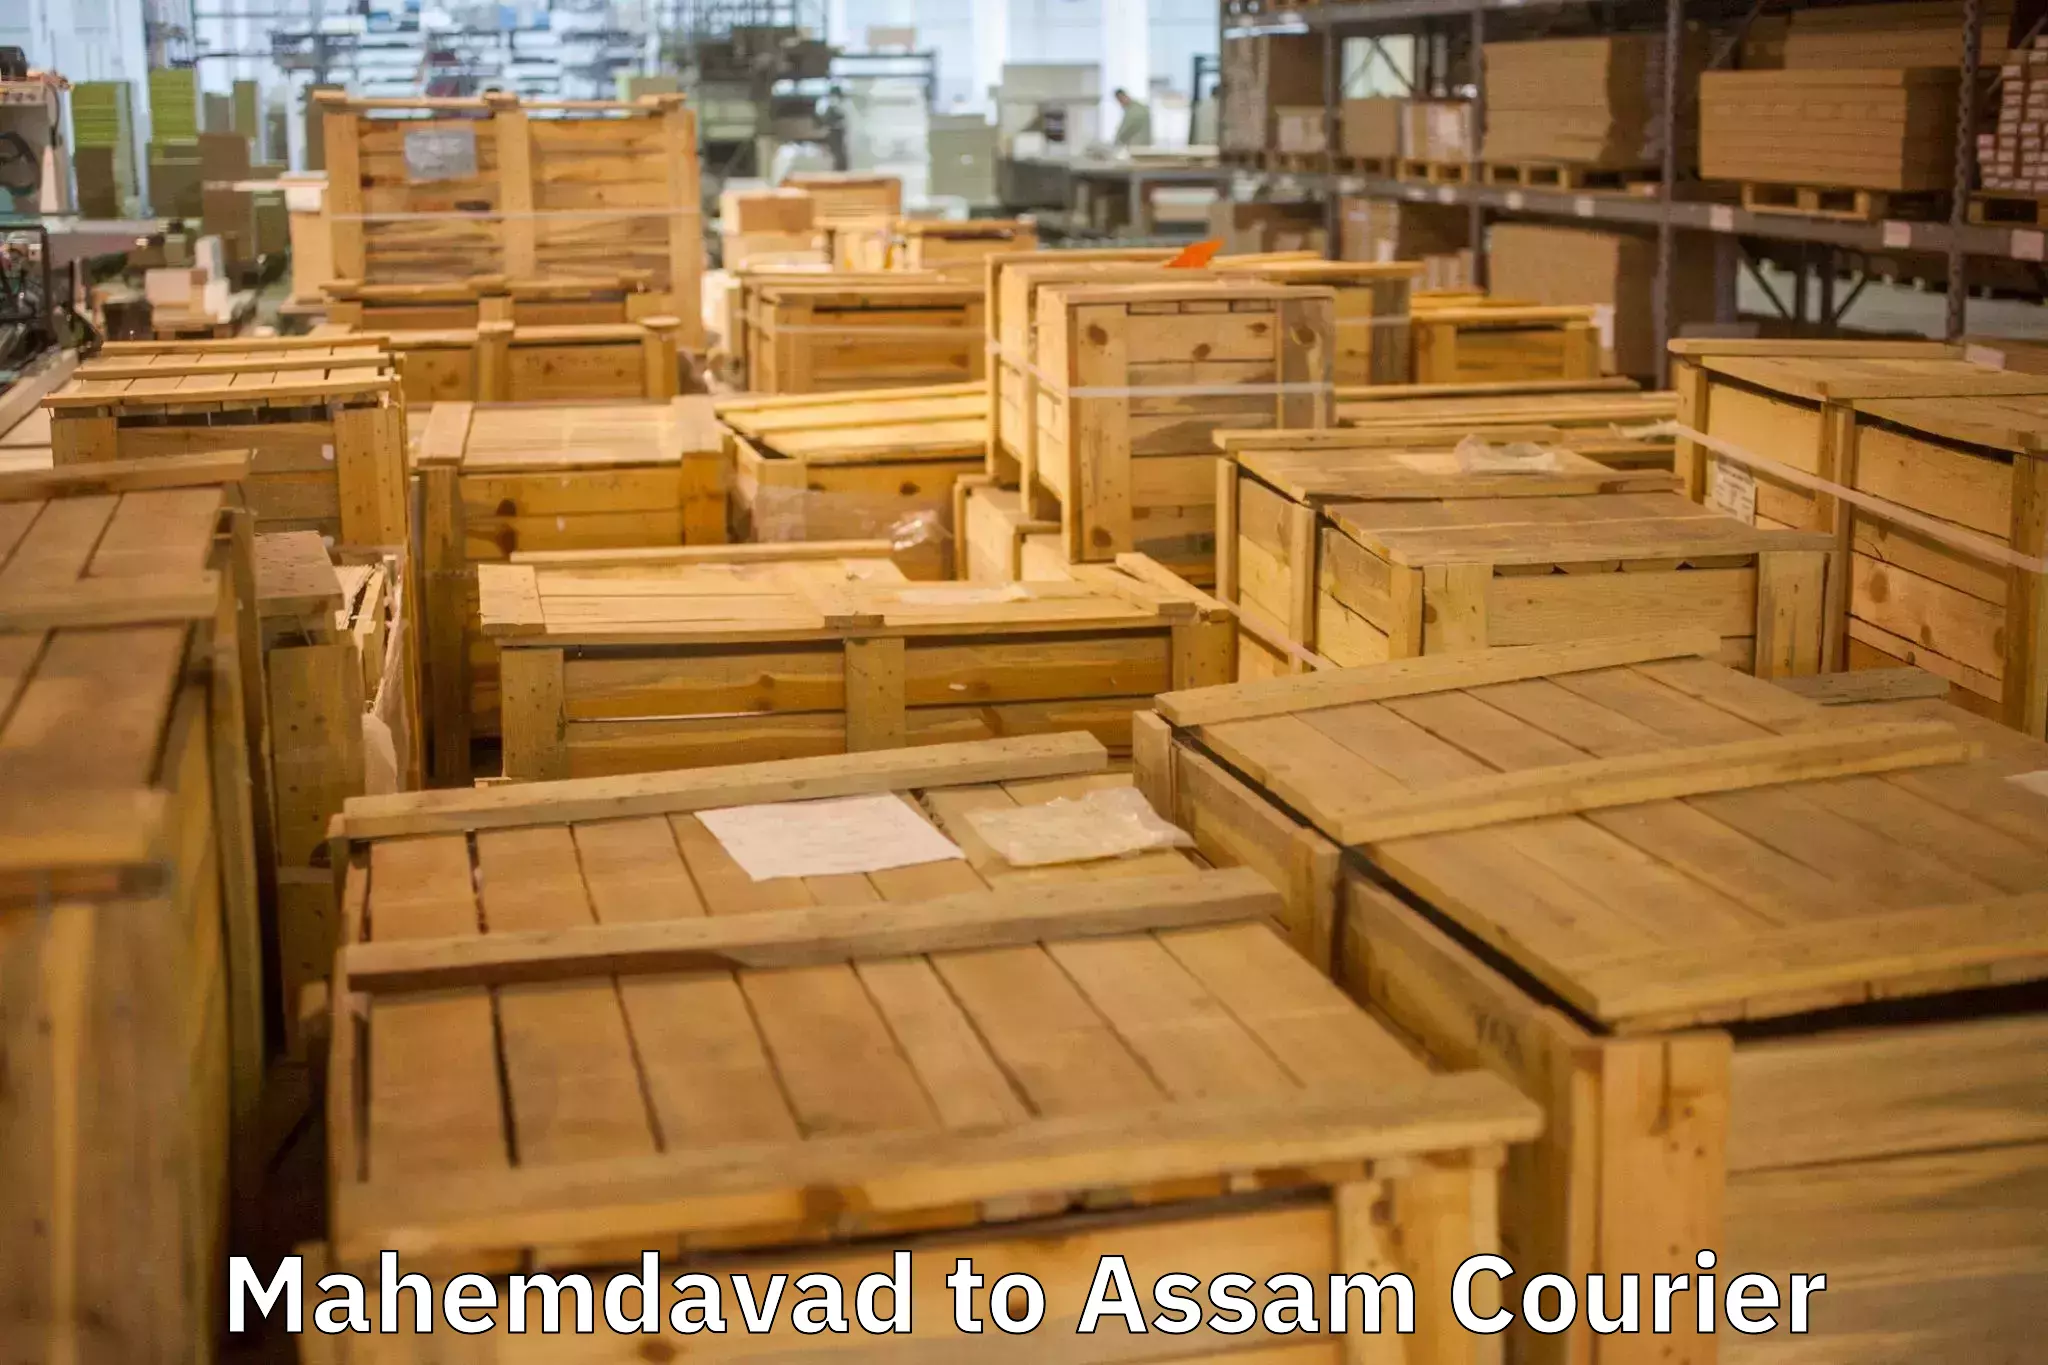 Furniture moving experts Mahemdavad to Assam